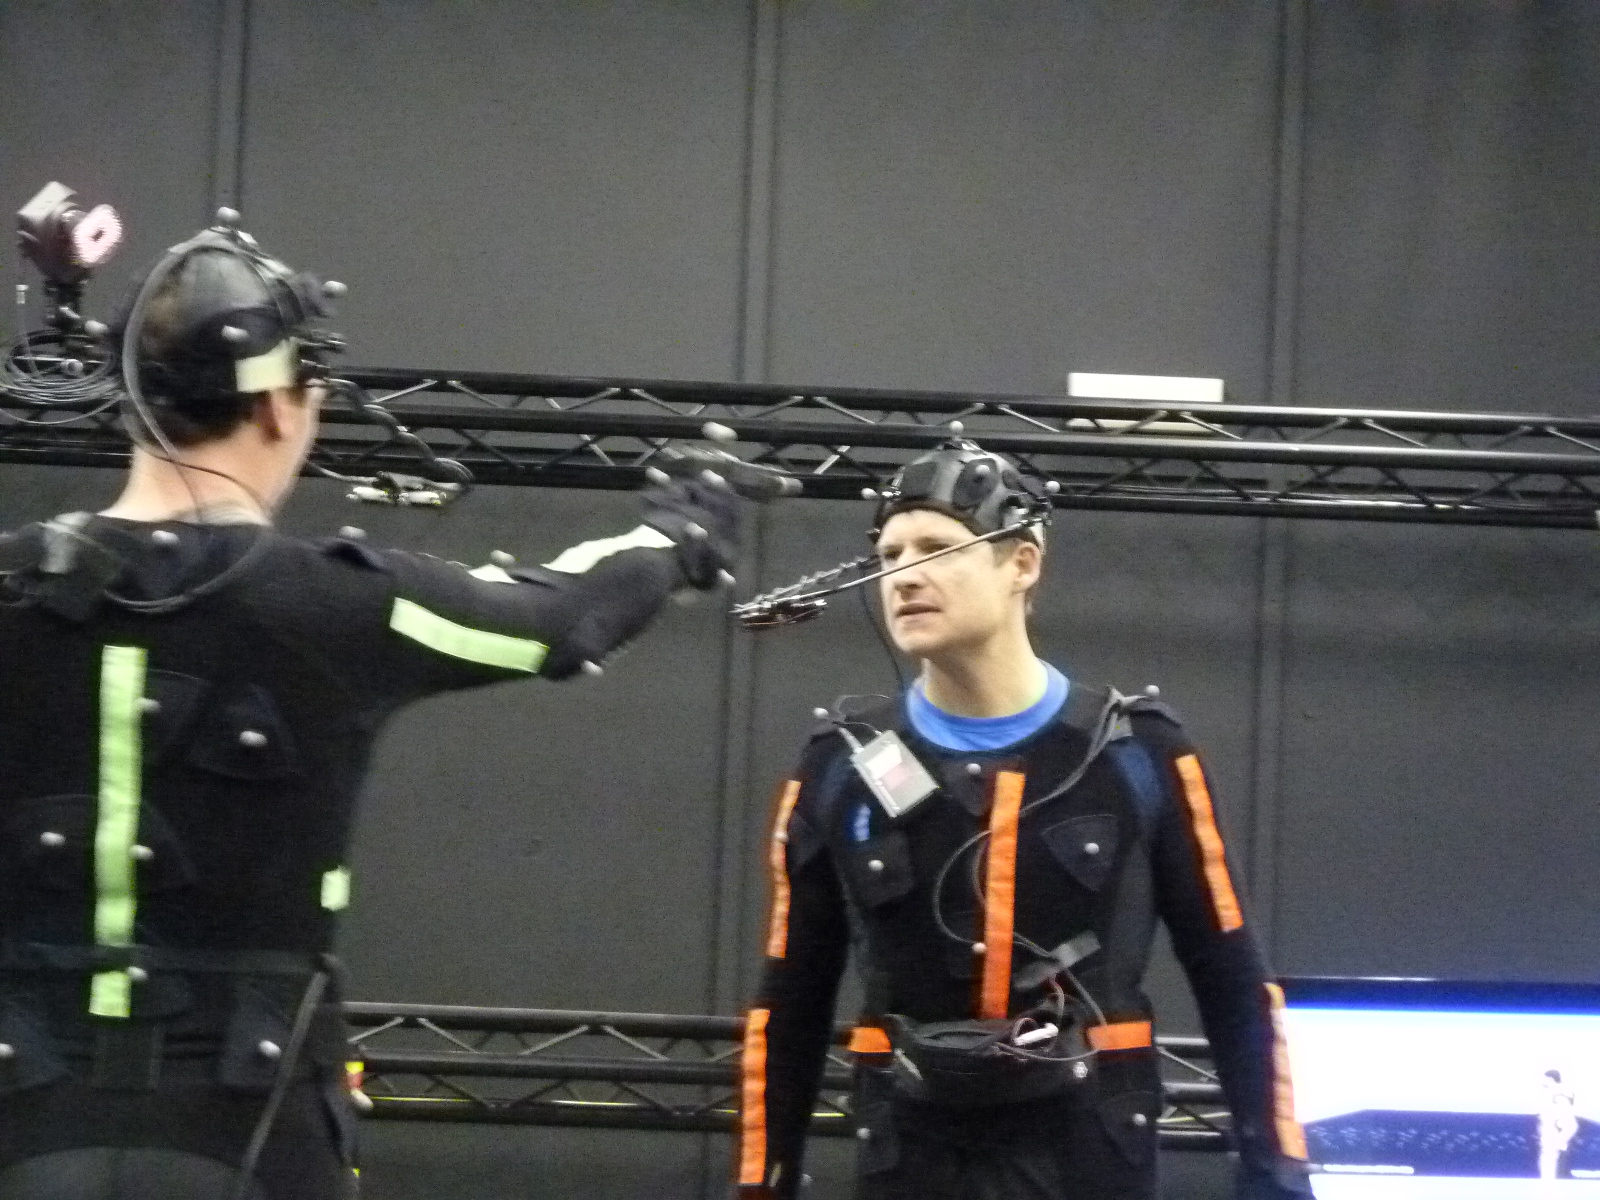 Rob Oldfield in a performance capture at Centroid in Pinewood Studios. (The very same studio where Sigourney Weaver torched the eggs in Aliens)